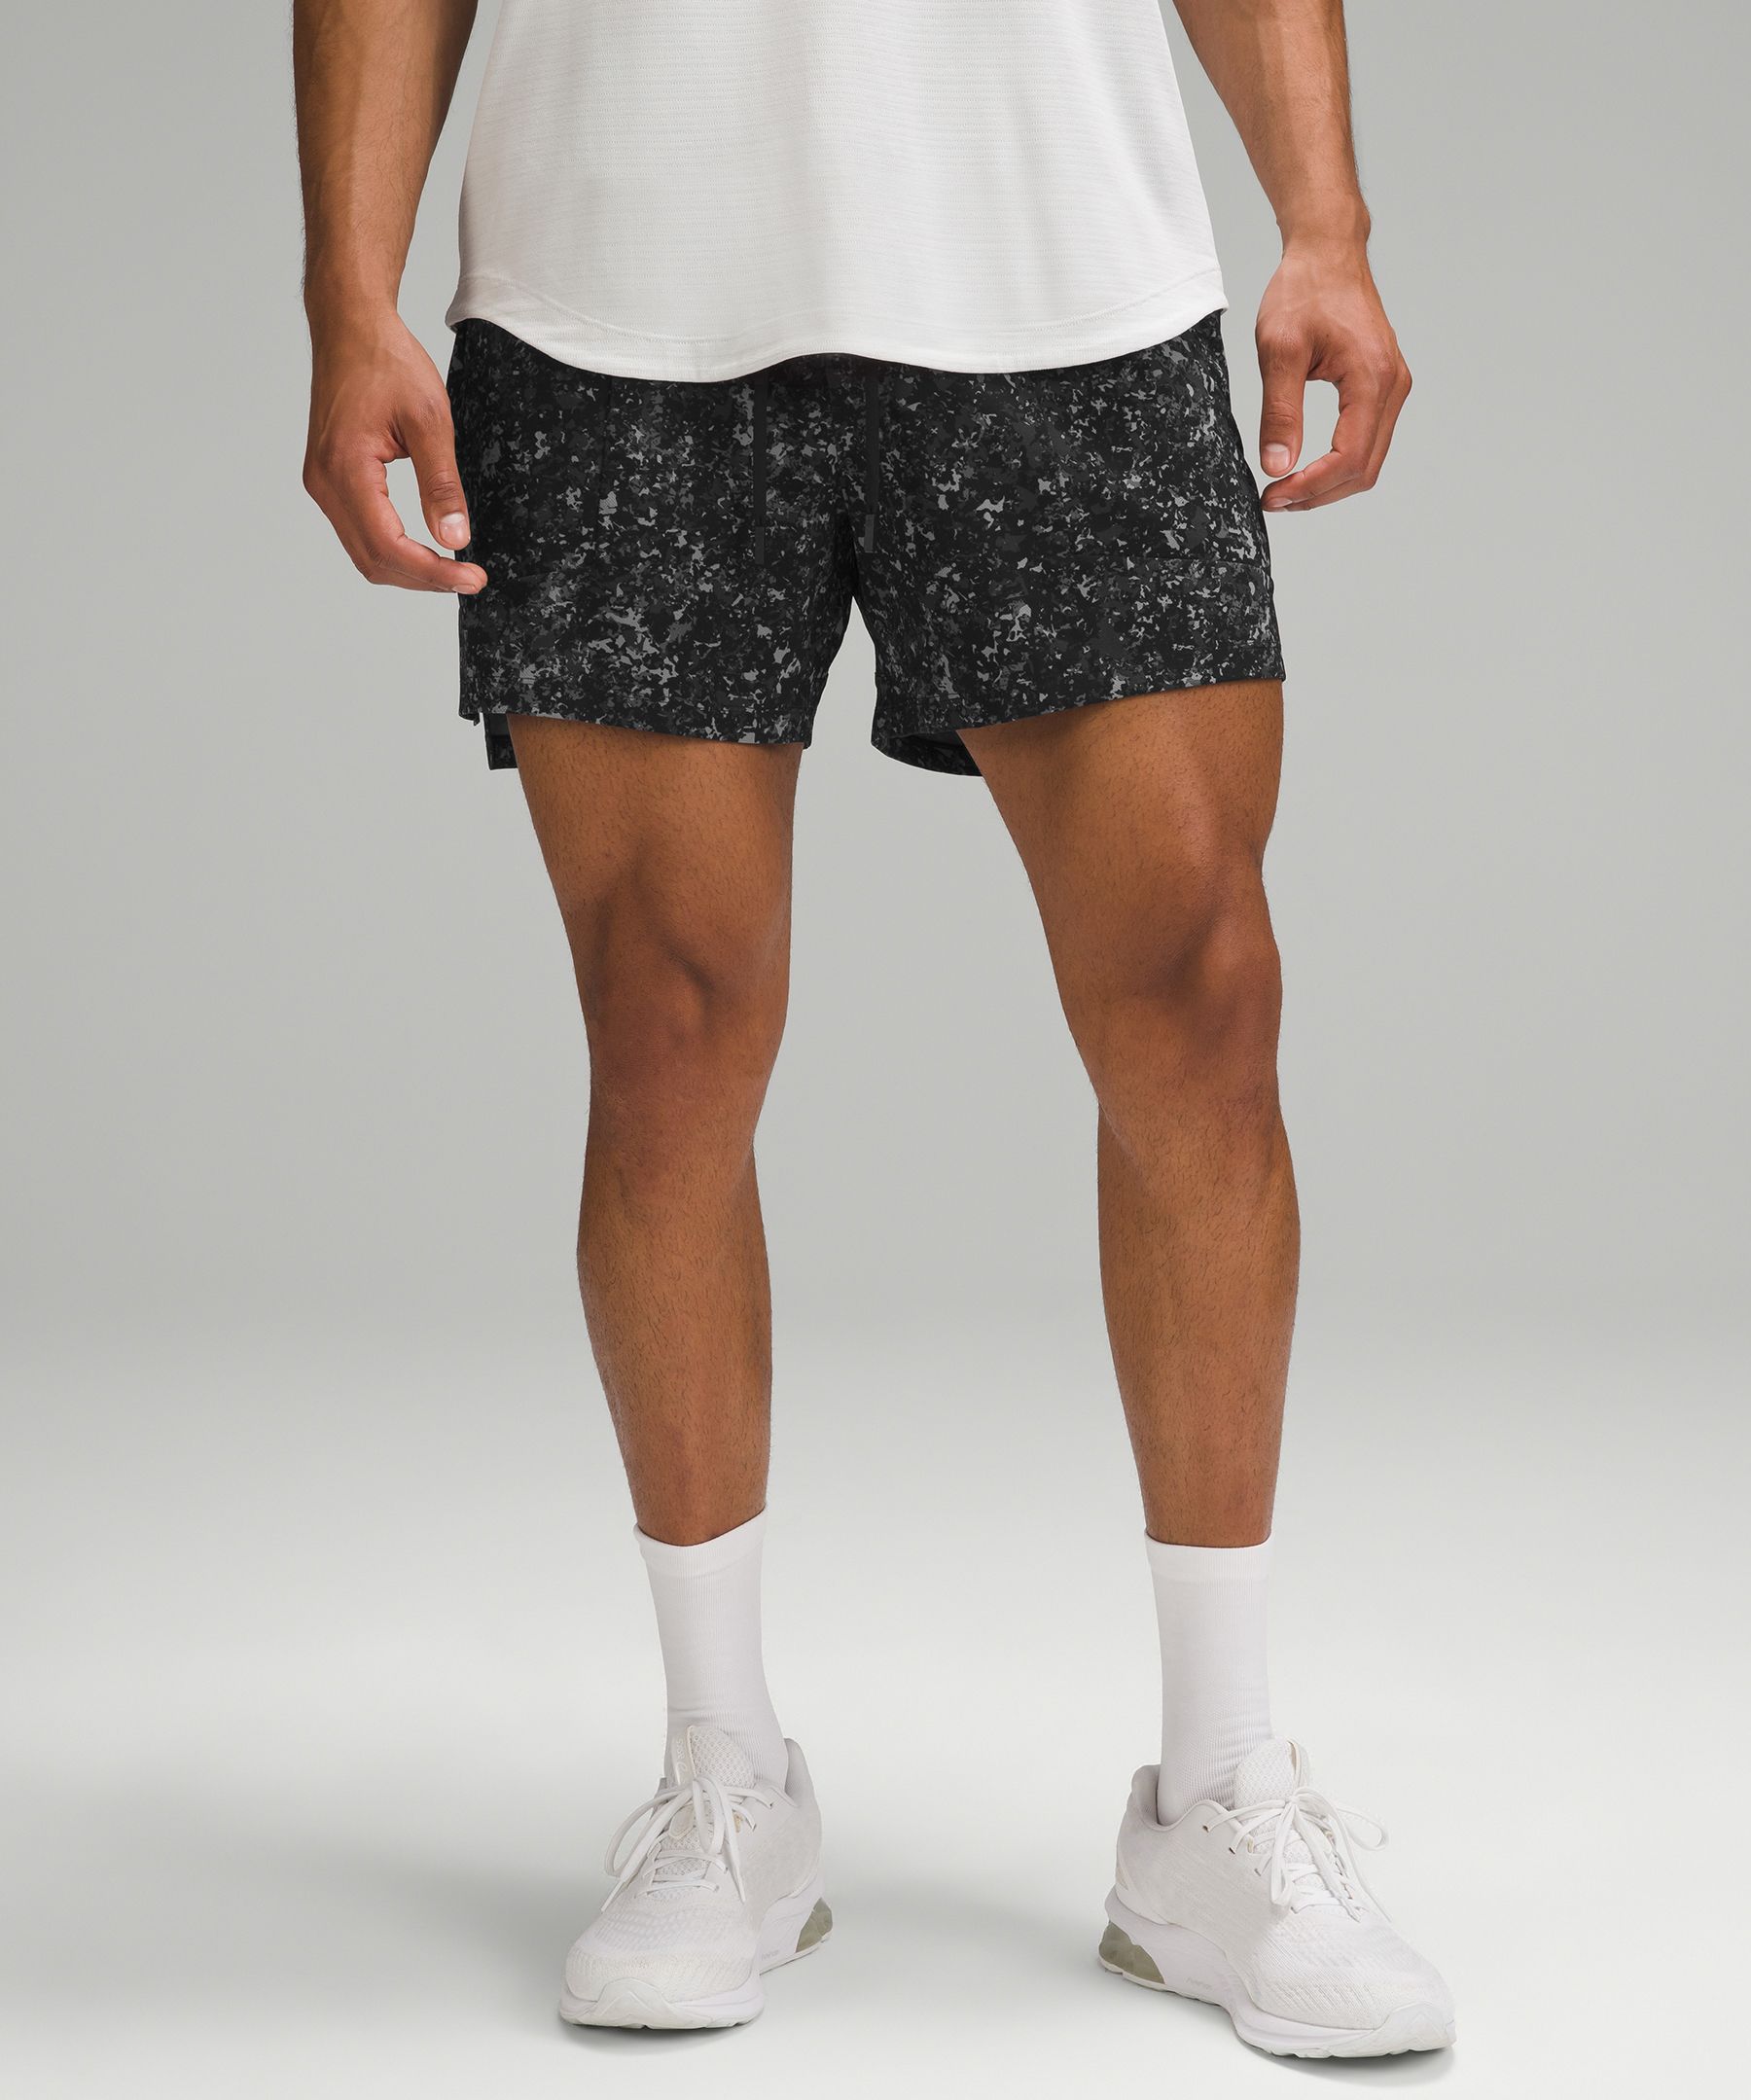 Shop lululemon For The Most Durable, Buttery-Soft Athletic Shorts For Your  Next Workout - BroBible